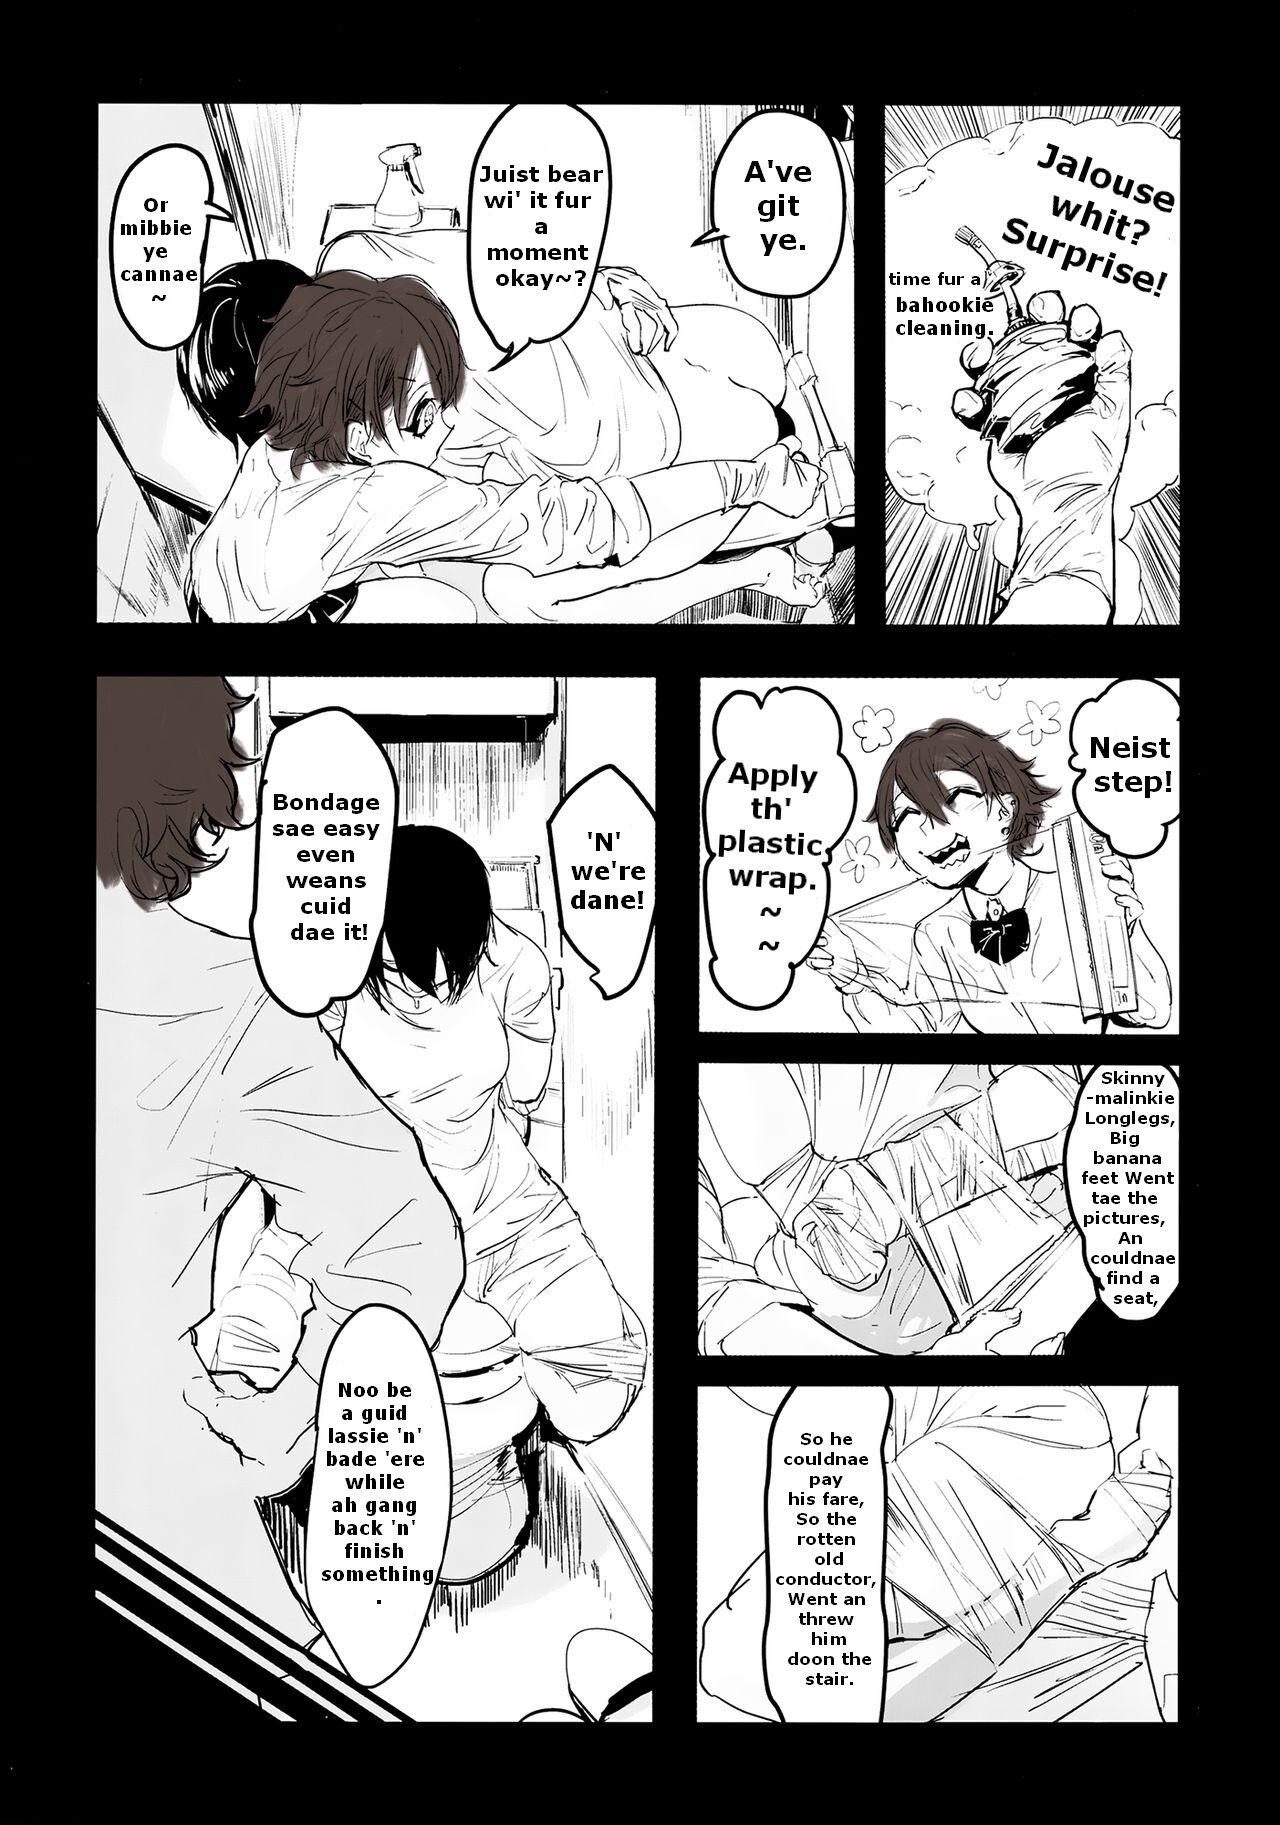 Lesbos Draw a Winner, Get One More! - Original Thief - Page 7